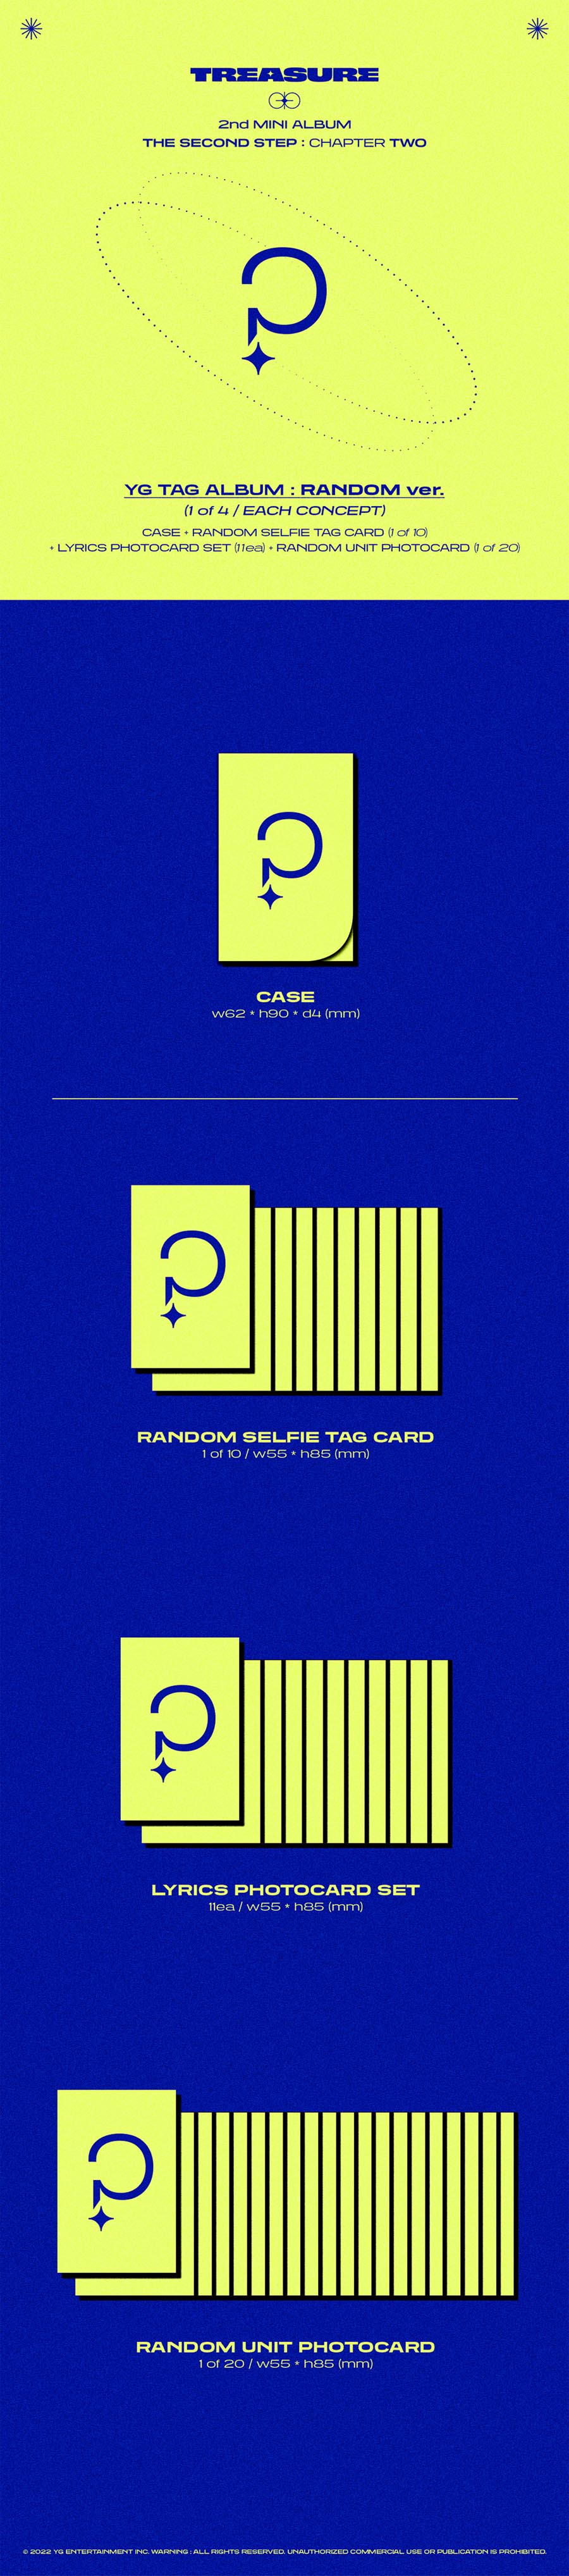 treasure-2nd-mini-album-the-second-step-chapter-two-yg-tag-album-wholesale